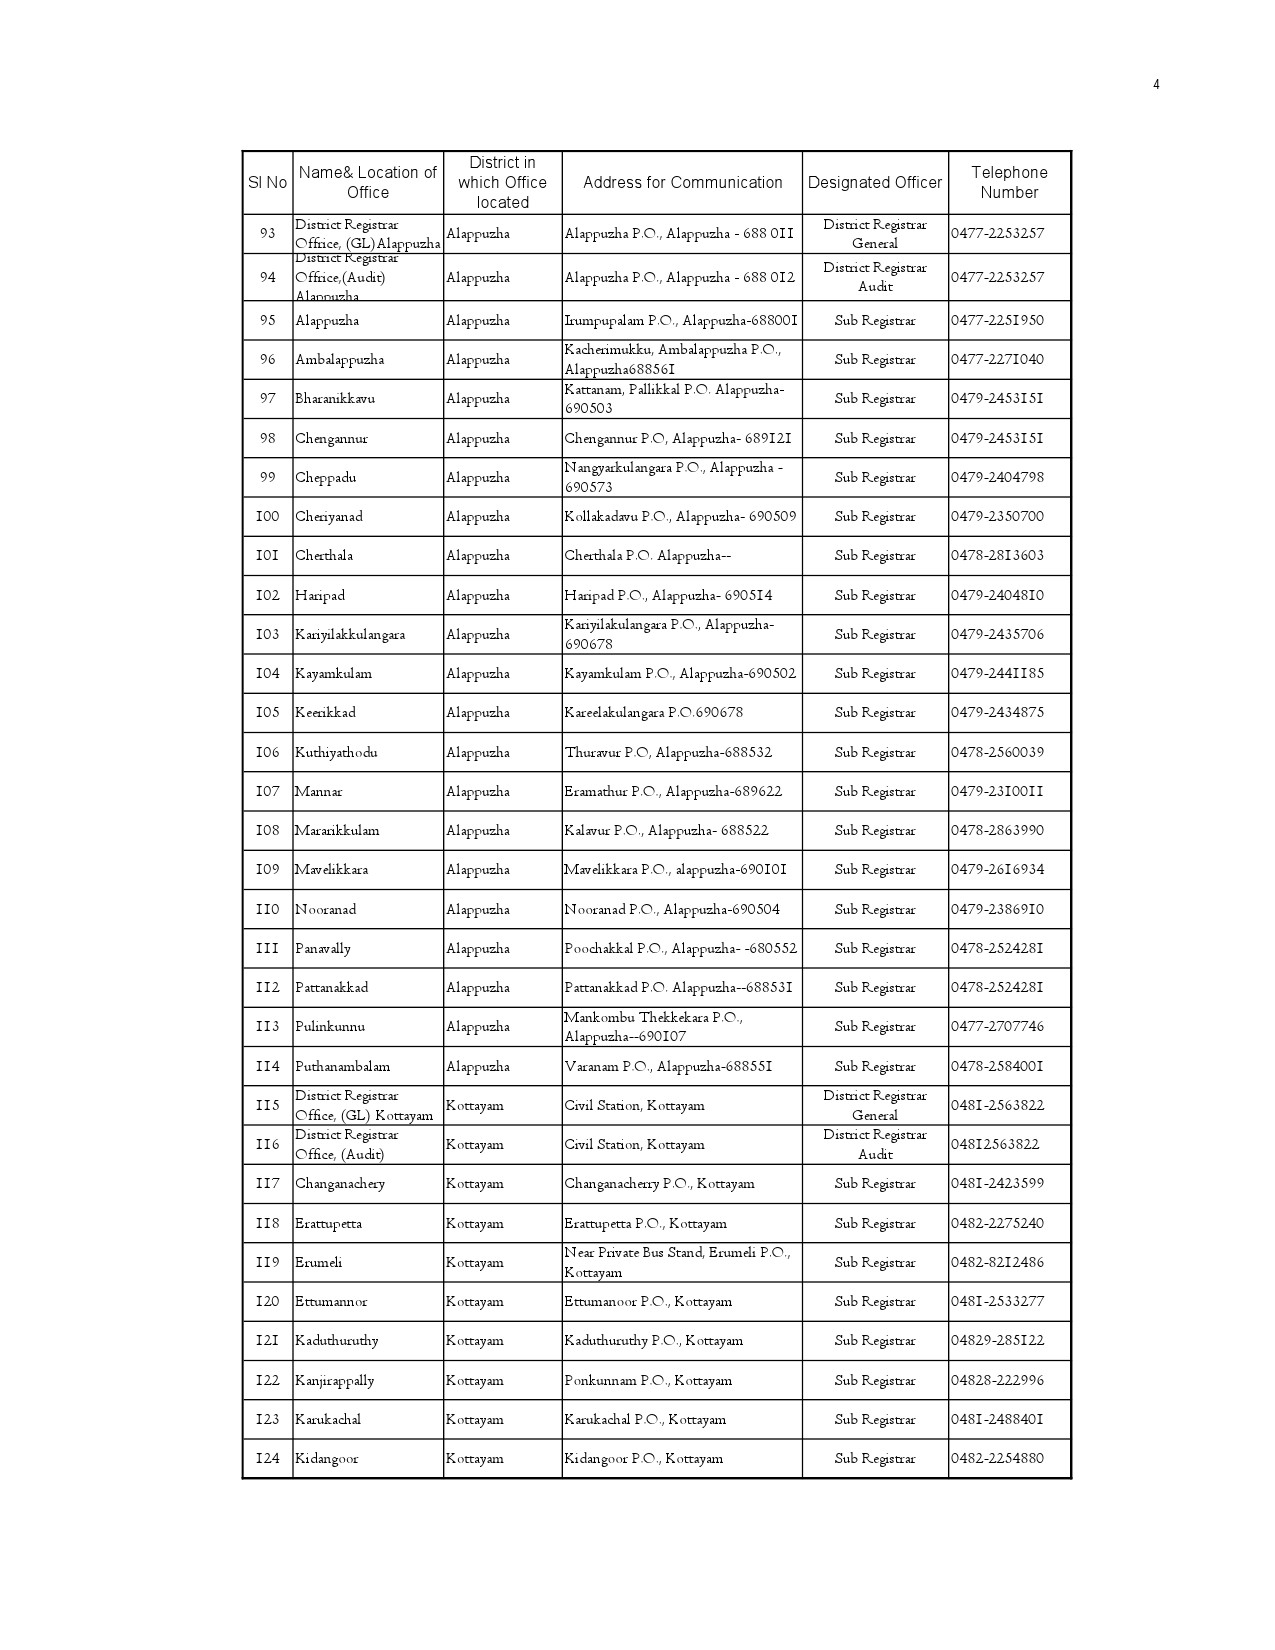 List of Offices in Kerala under the Department of Registration - Notification Image 4